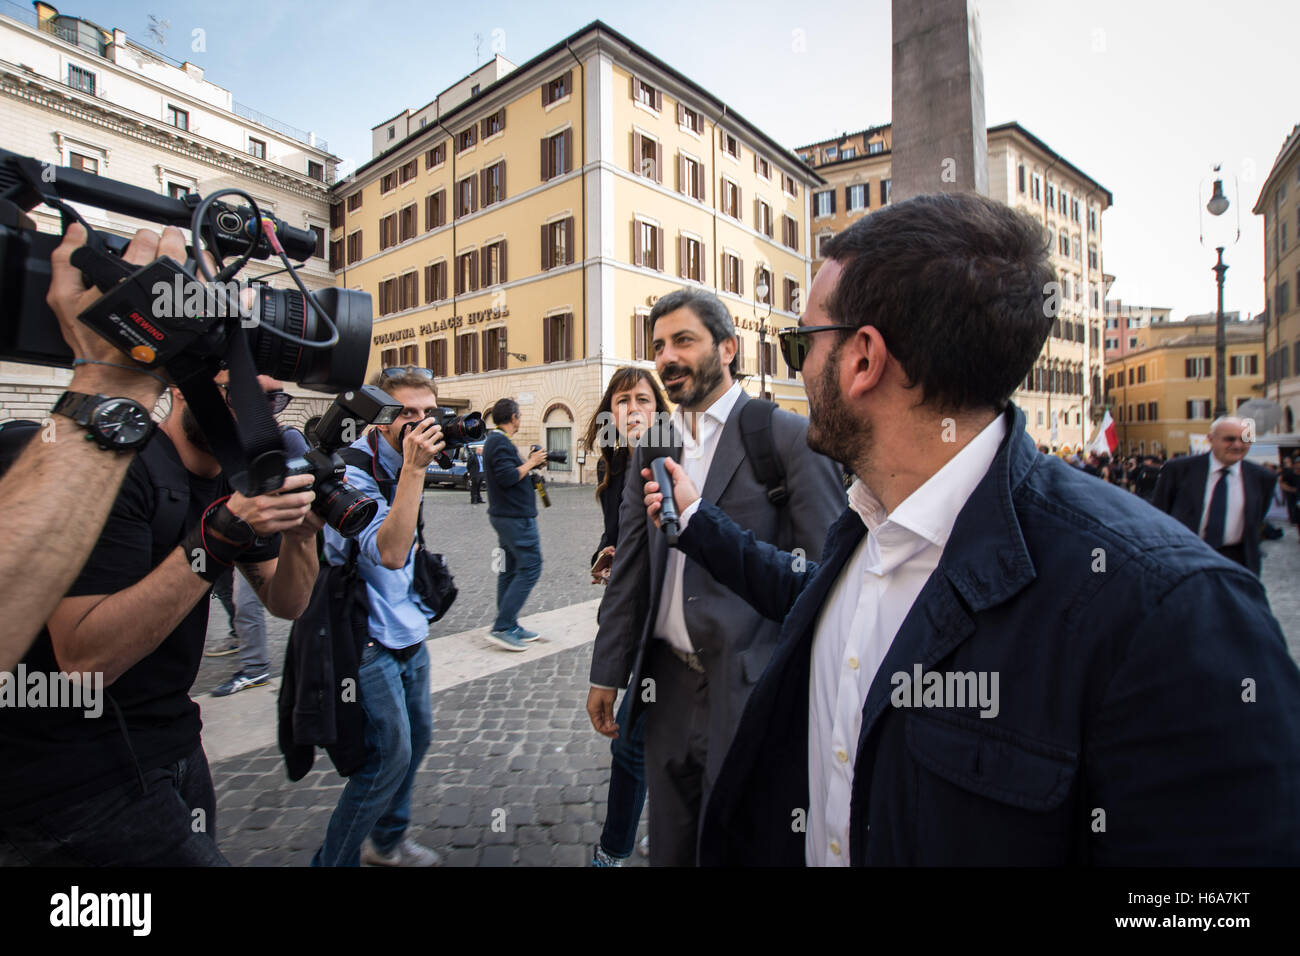 Rome, Italy. 25th Oct, 2016. Italy Rome 25 October 2016, Manifestation of the 5 Star Movement (m5s) in support of the bill to halve the salaries of parliamentarians. *** Local Caption *** Italy Rome 25 October 2016, Manifestation of the 5 Star Movement (m5s) in support of the bill to halve the salaries of parliamentarians. pictured Roberto Fico Credit:  Andrea Ronchini/Alamy Live News Stock Photo